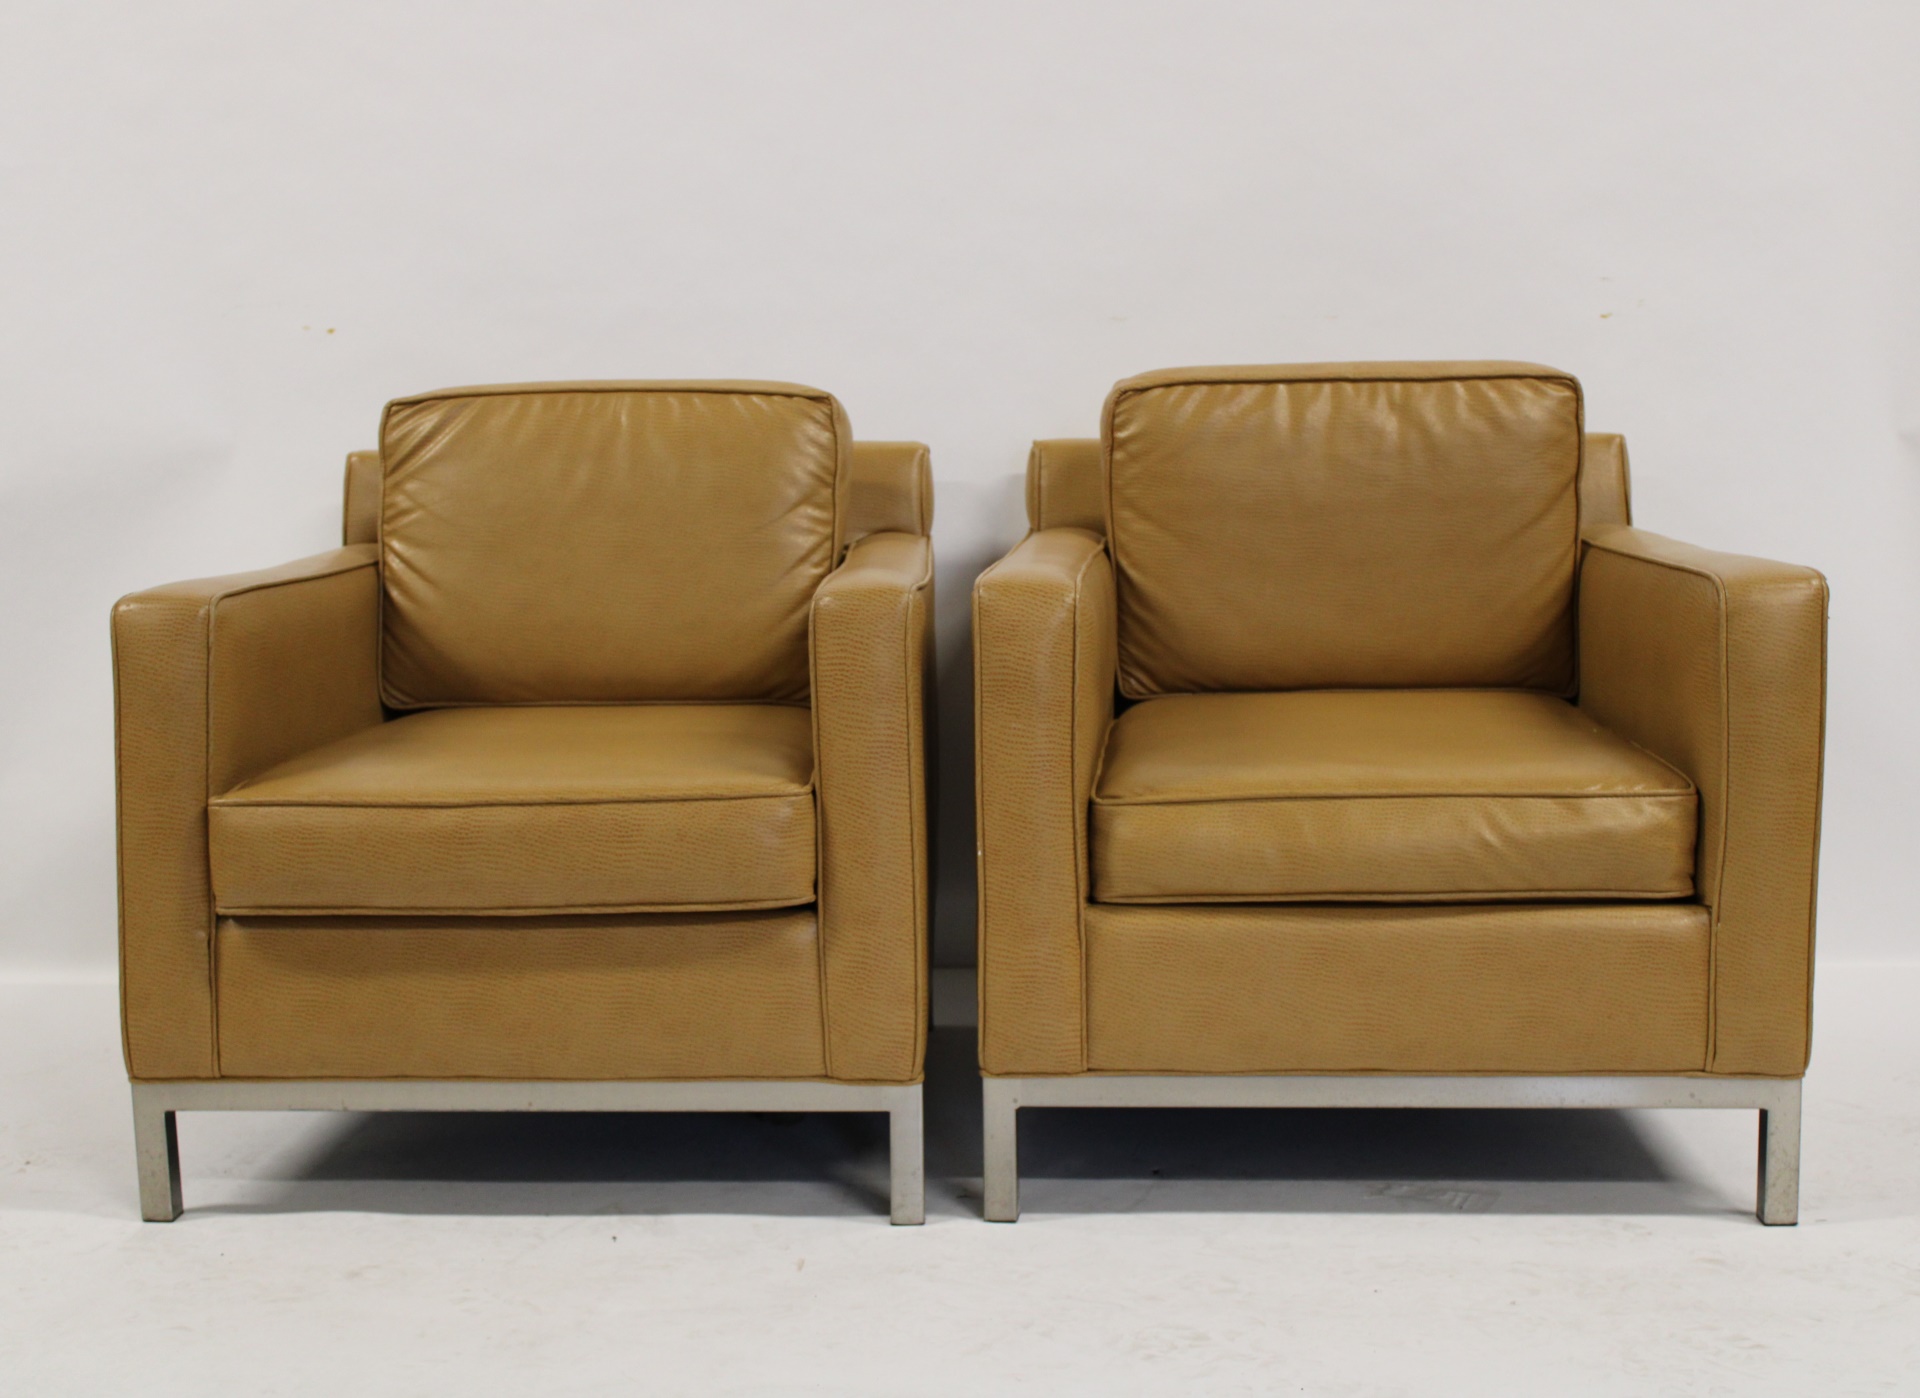 A MIDCENTURY PAIR OF FAUX OSTRICH